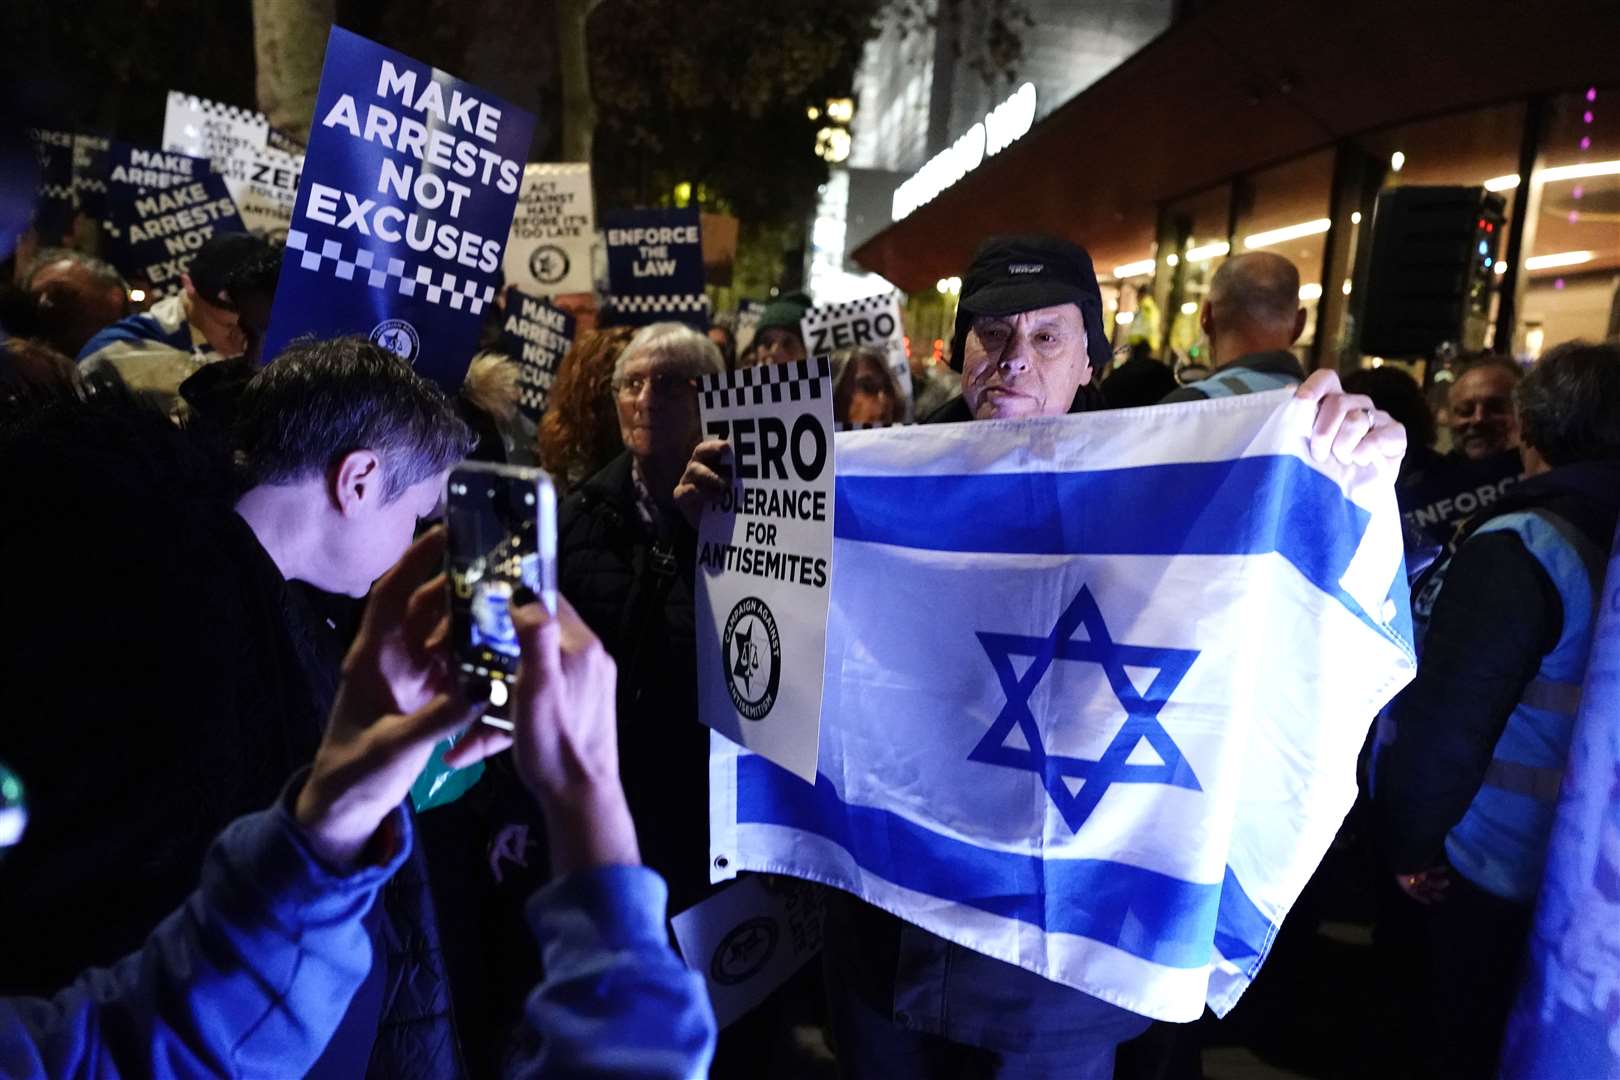 A campaigner holds up an Israeli flag during the protest (Jordan Pettitt/PA)